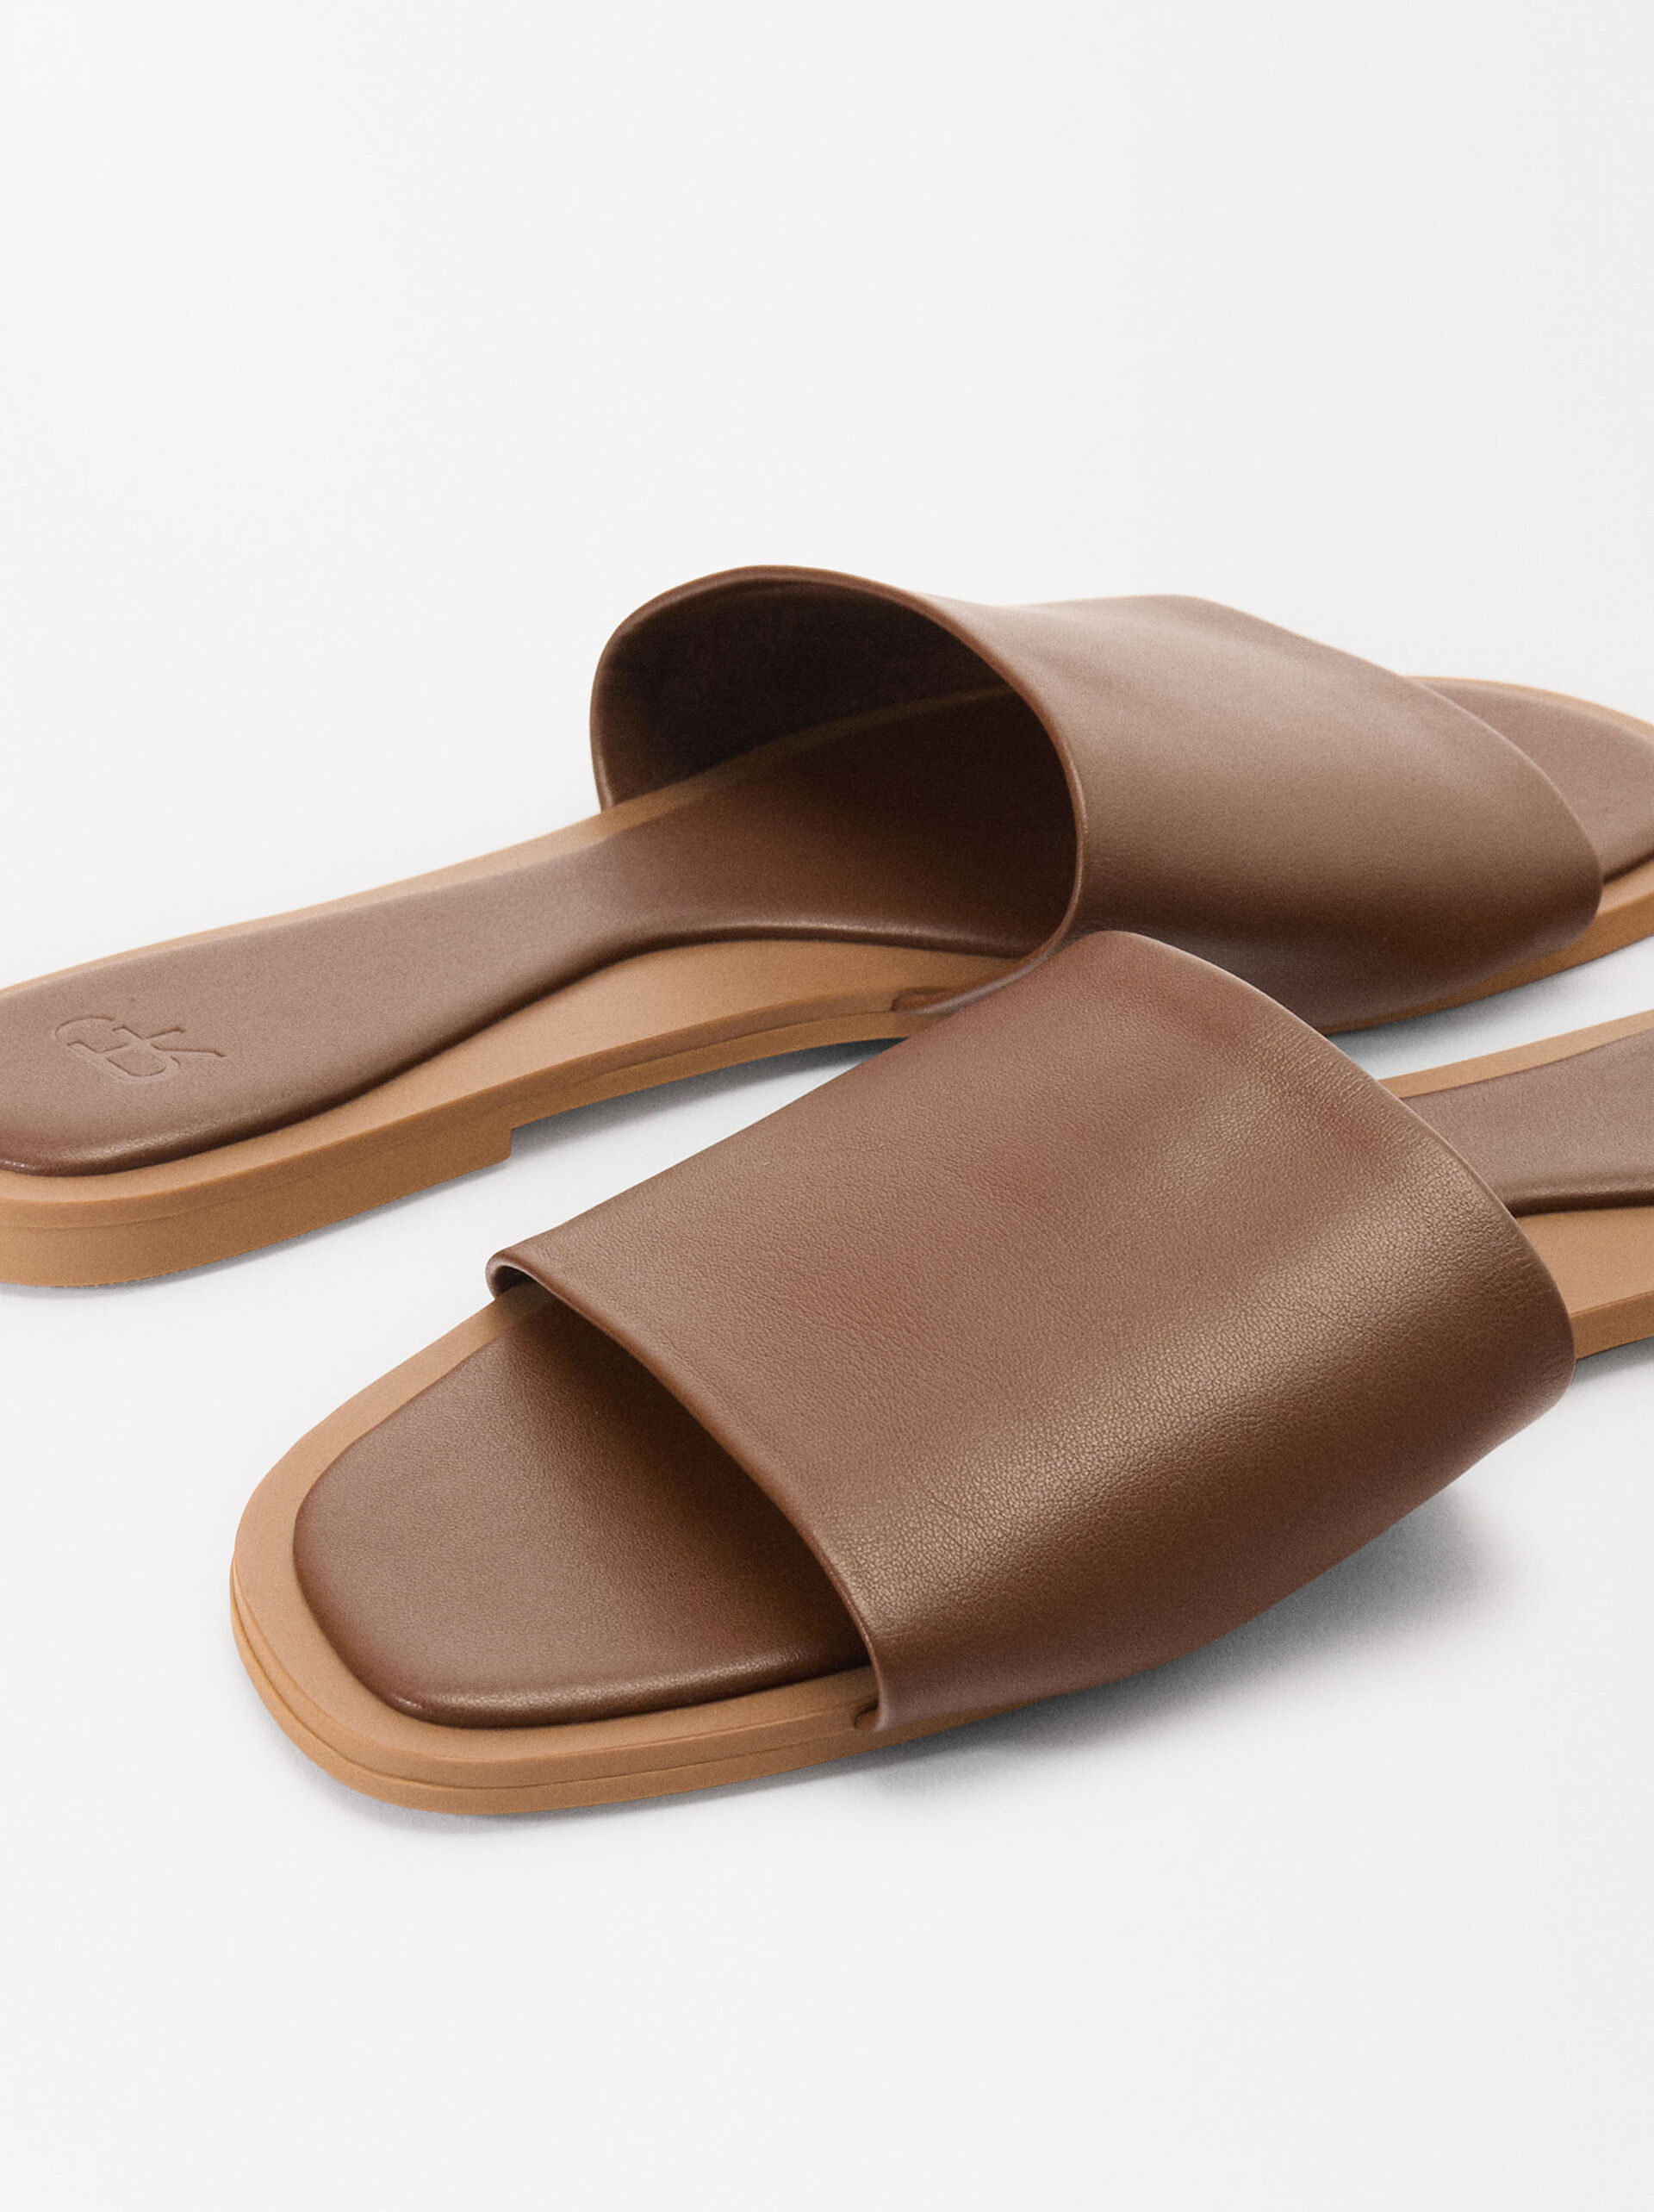 Napa Leather Sandals image number 4.0